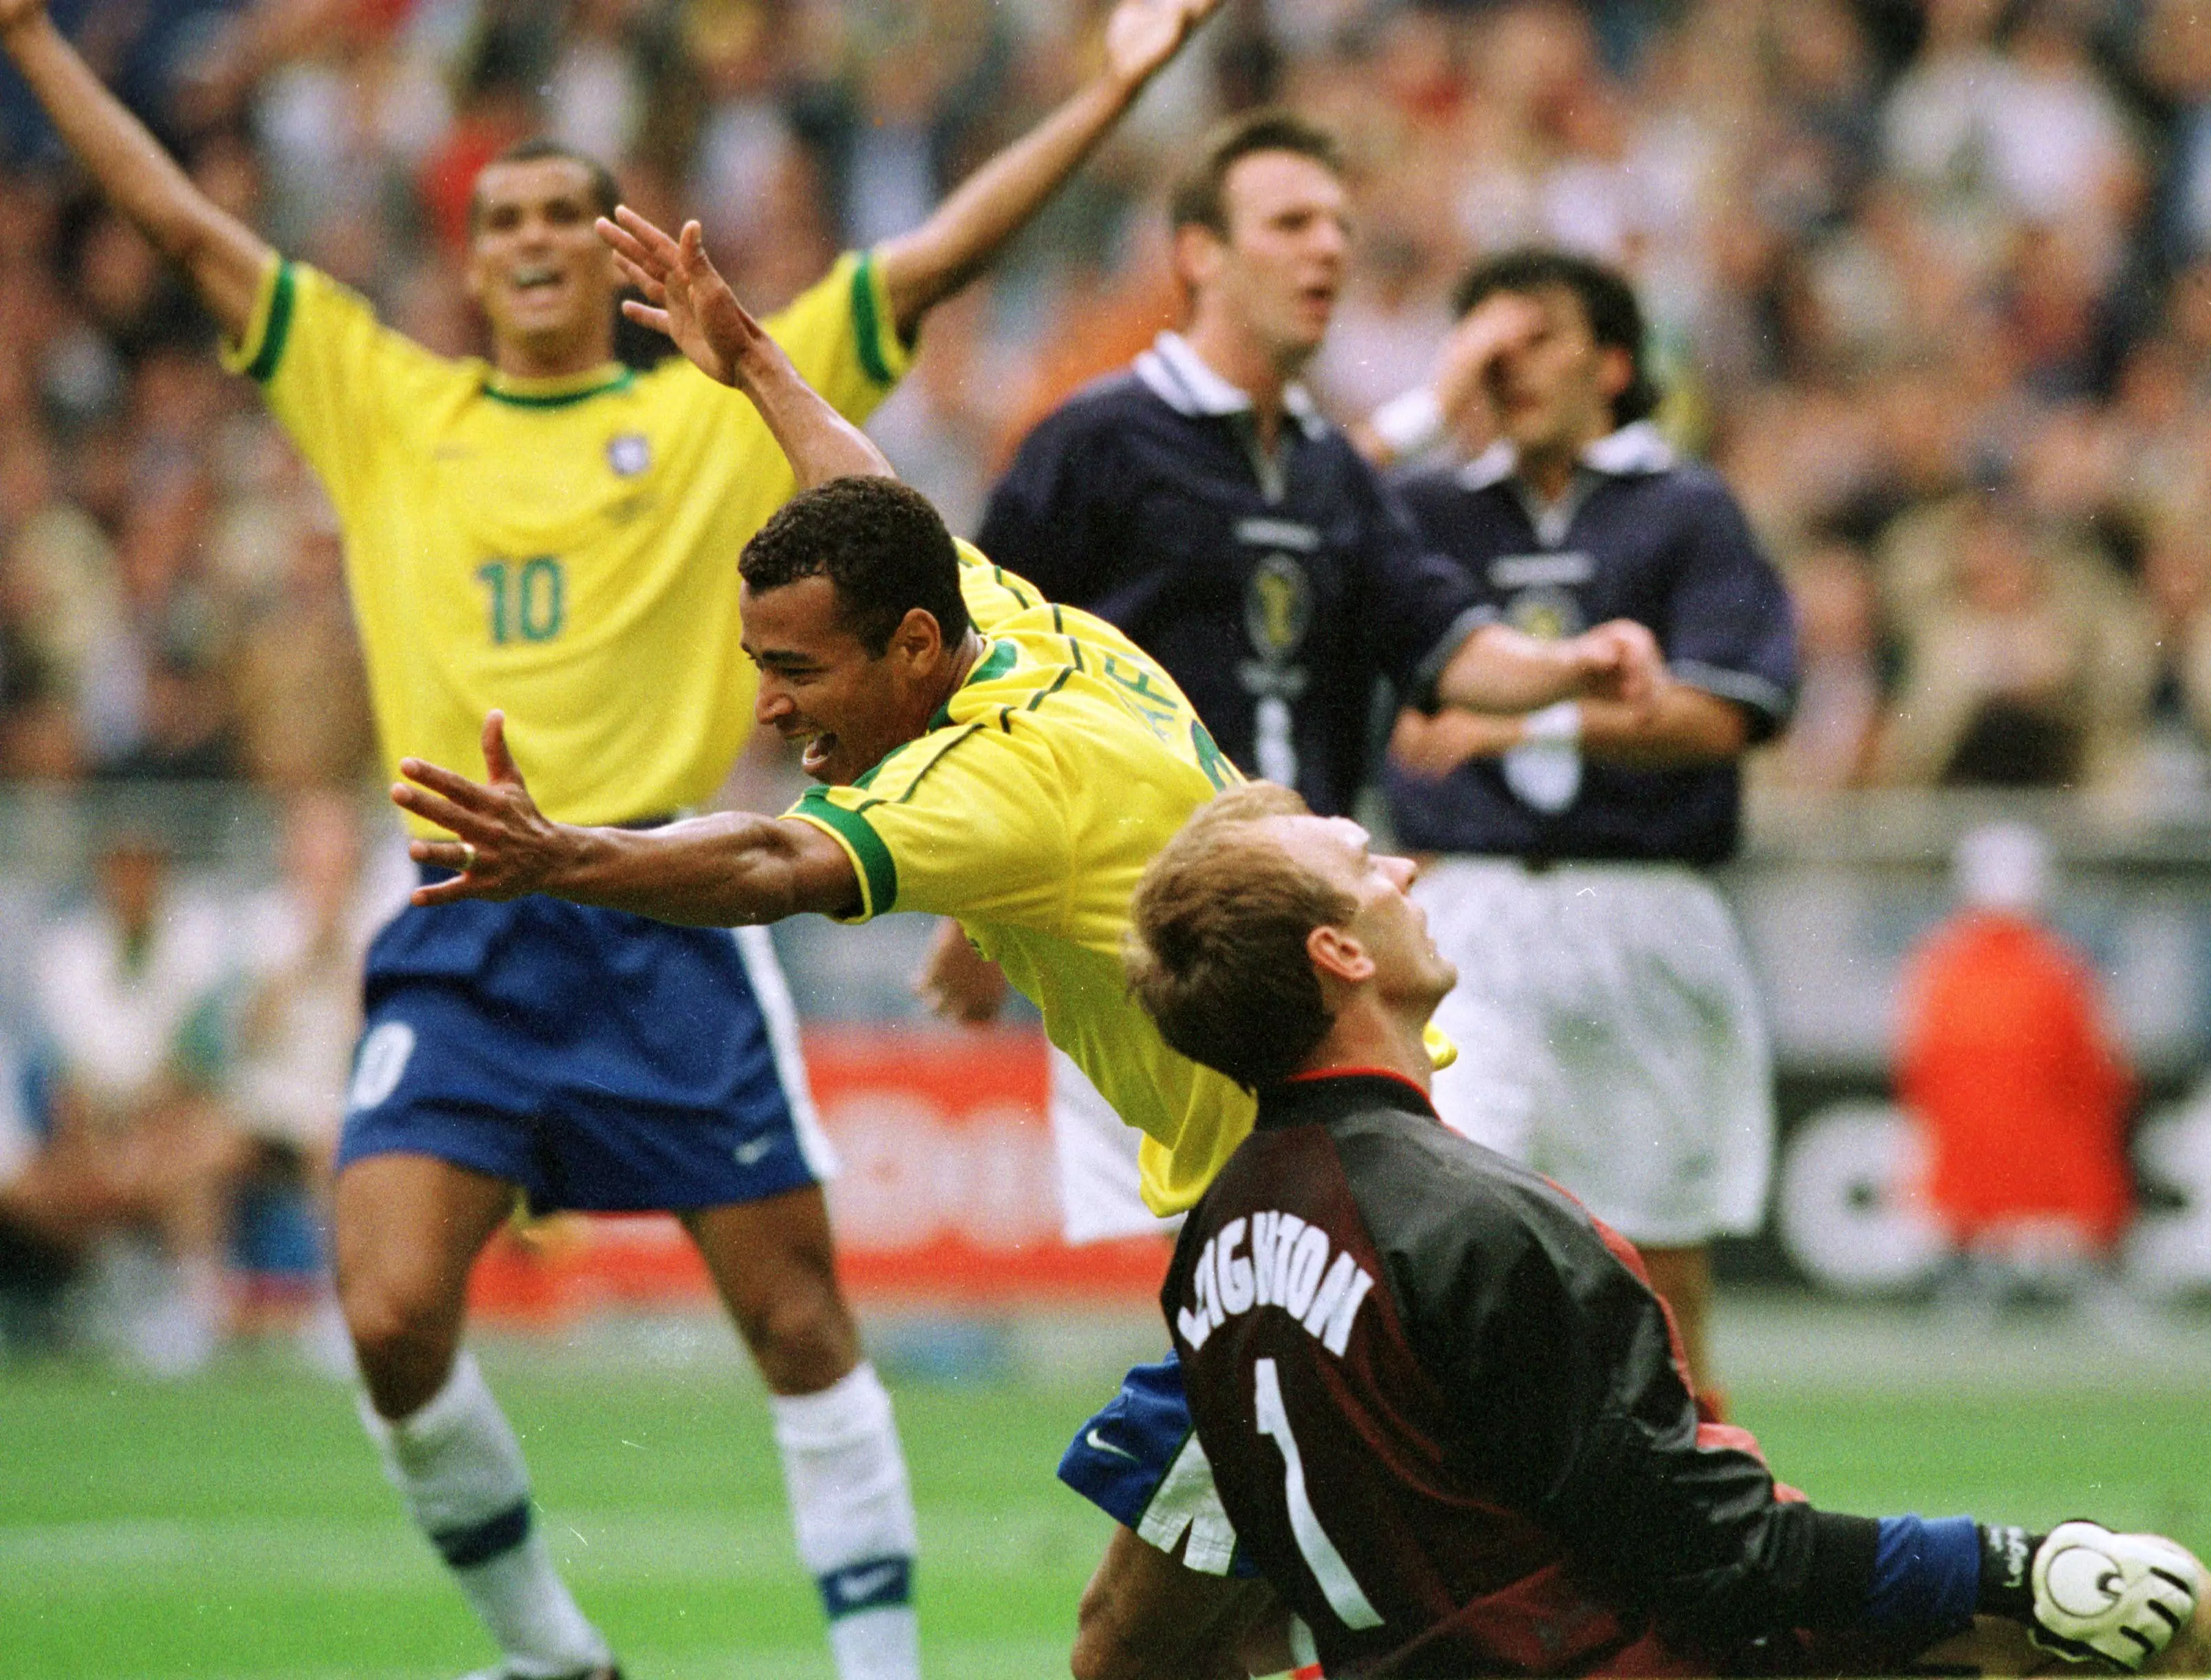 The last time Scotland were in an international tournament they faced World champions Brazil. Image: PA Images